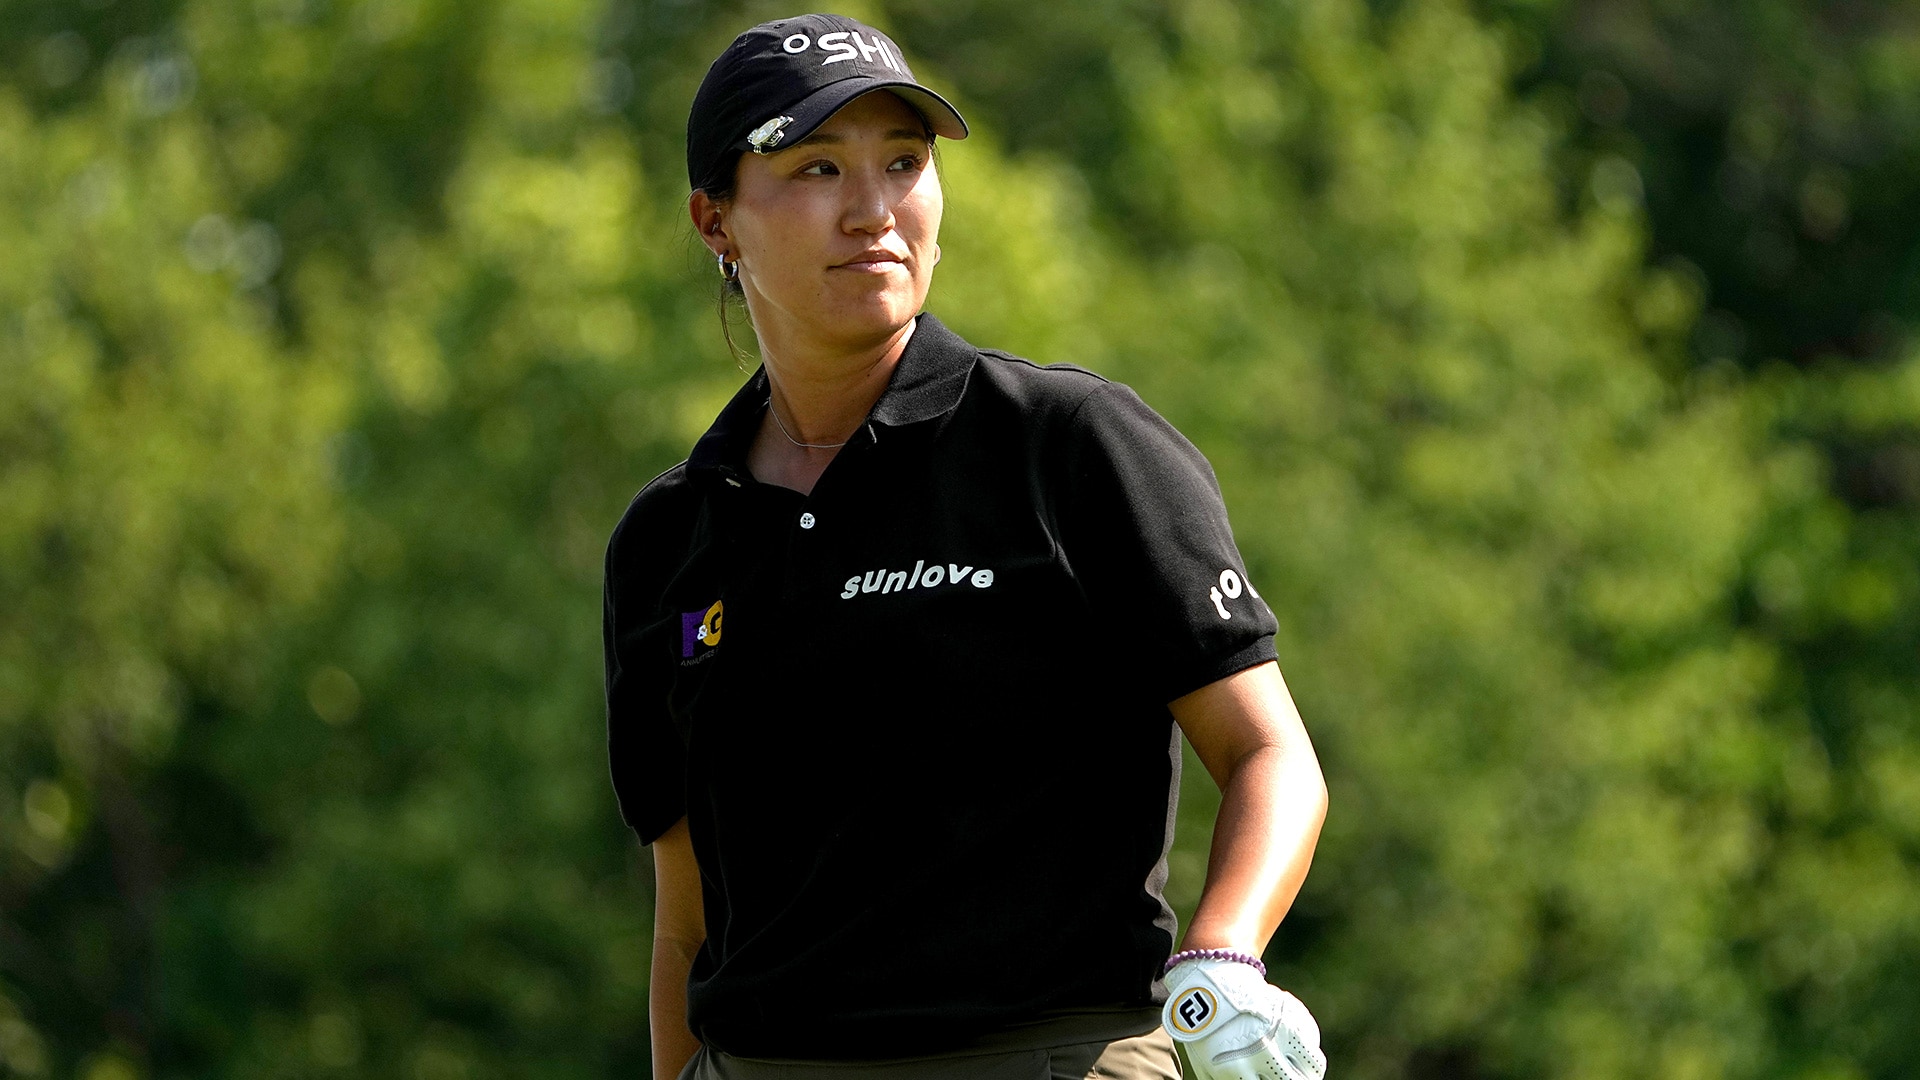 Annie Park leads Dana Open while Rose Zhang shoots 77 to miss cut